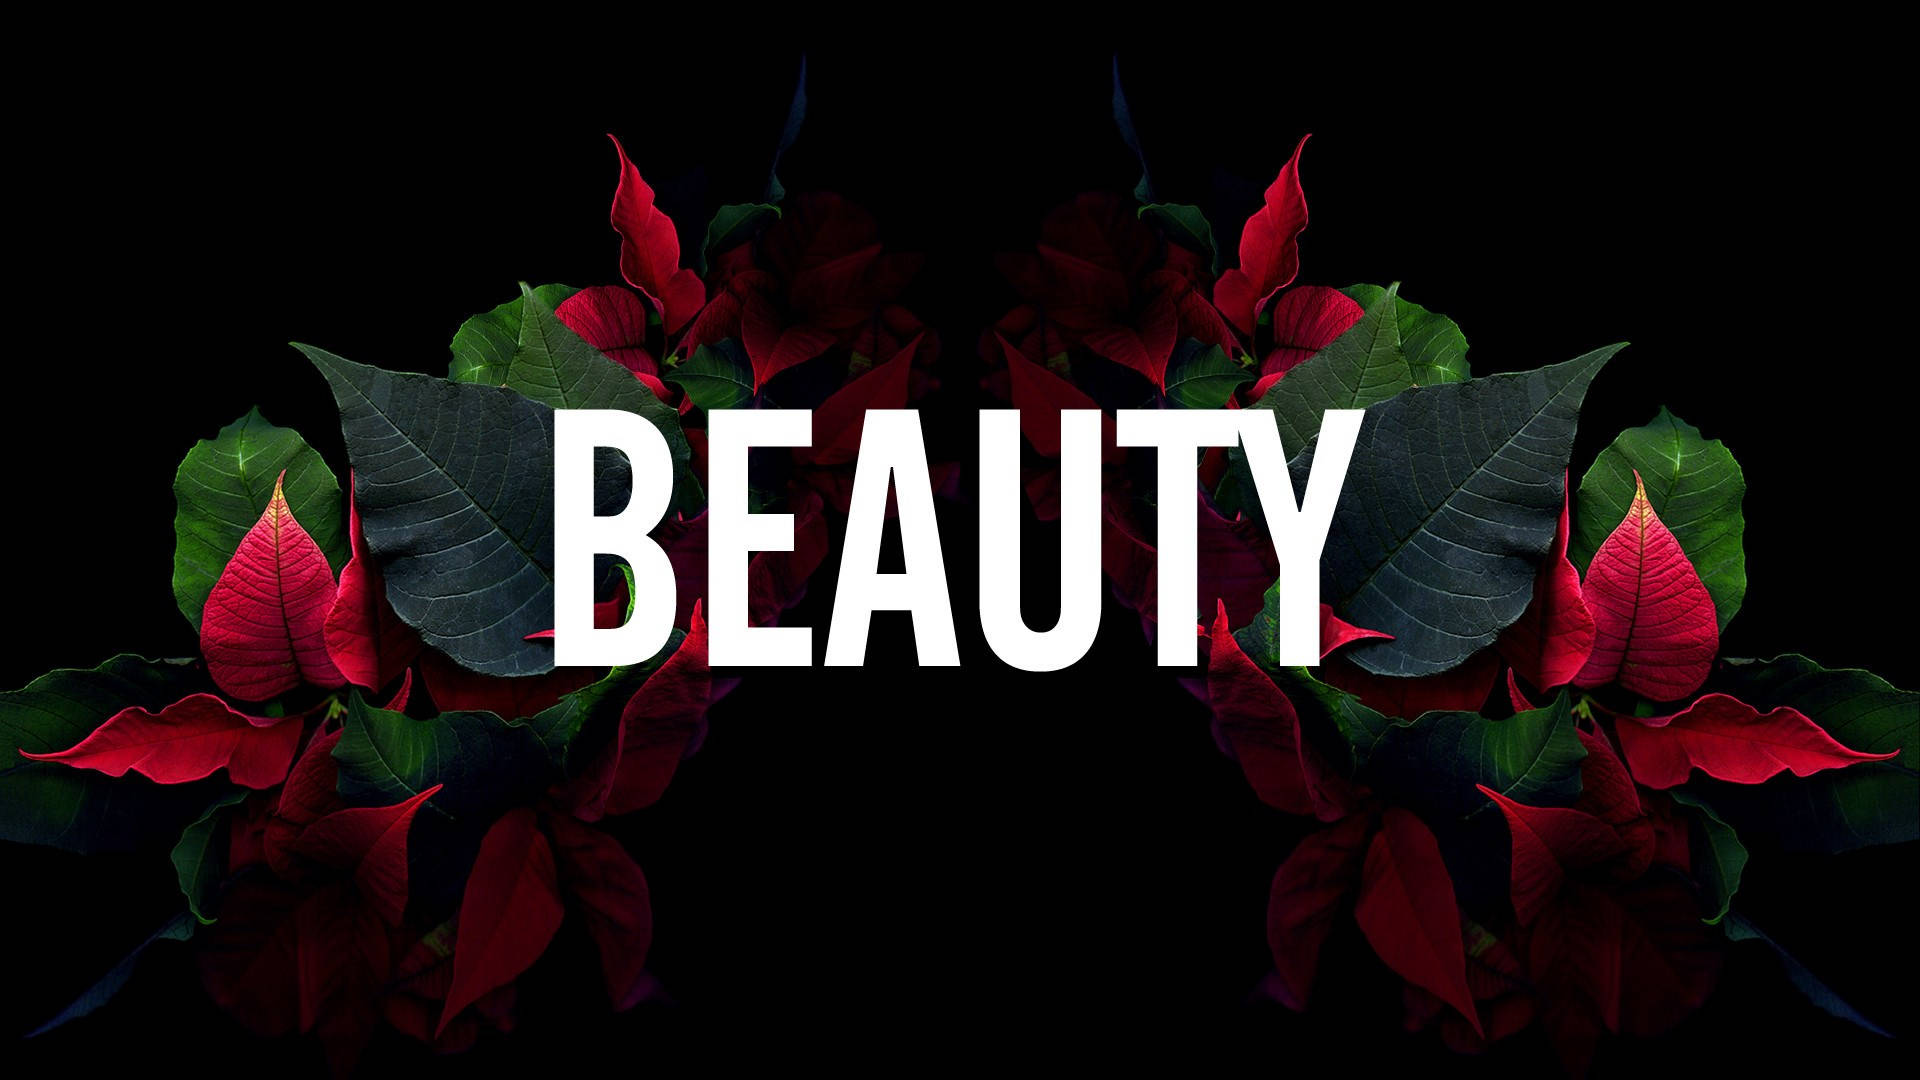 Beauty - A Black Background With Red Flowers Background